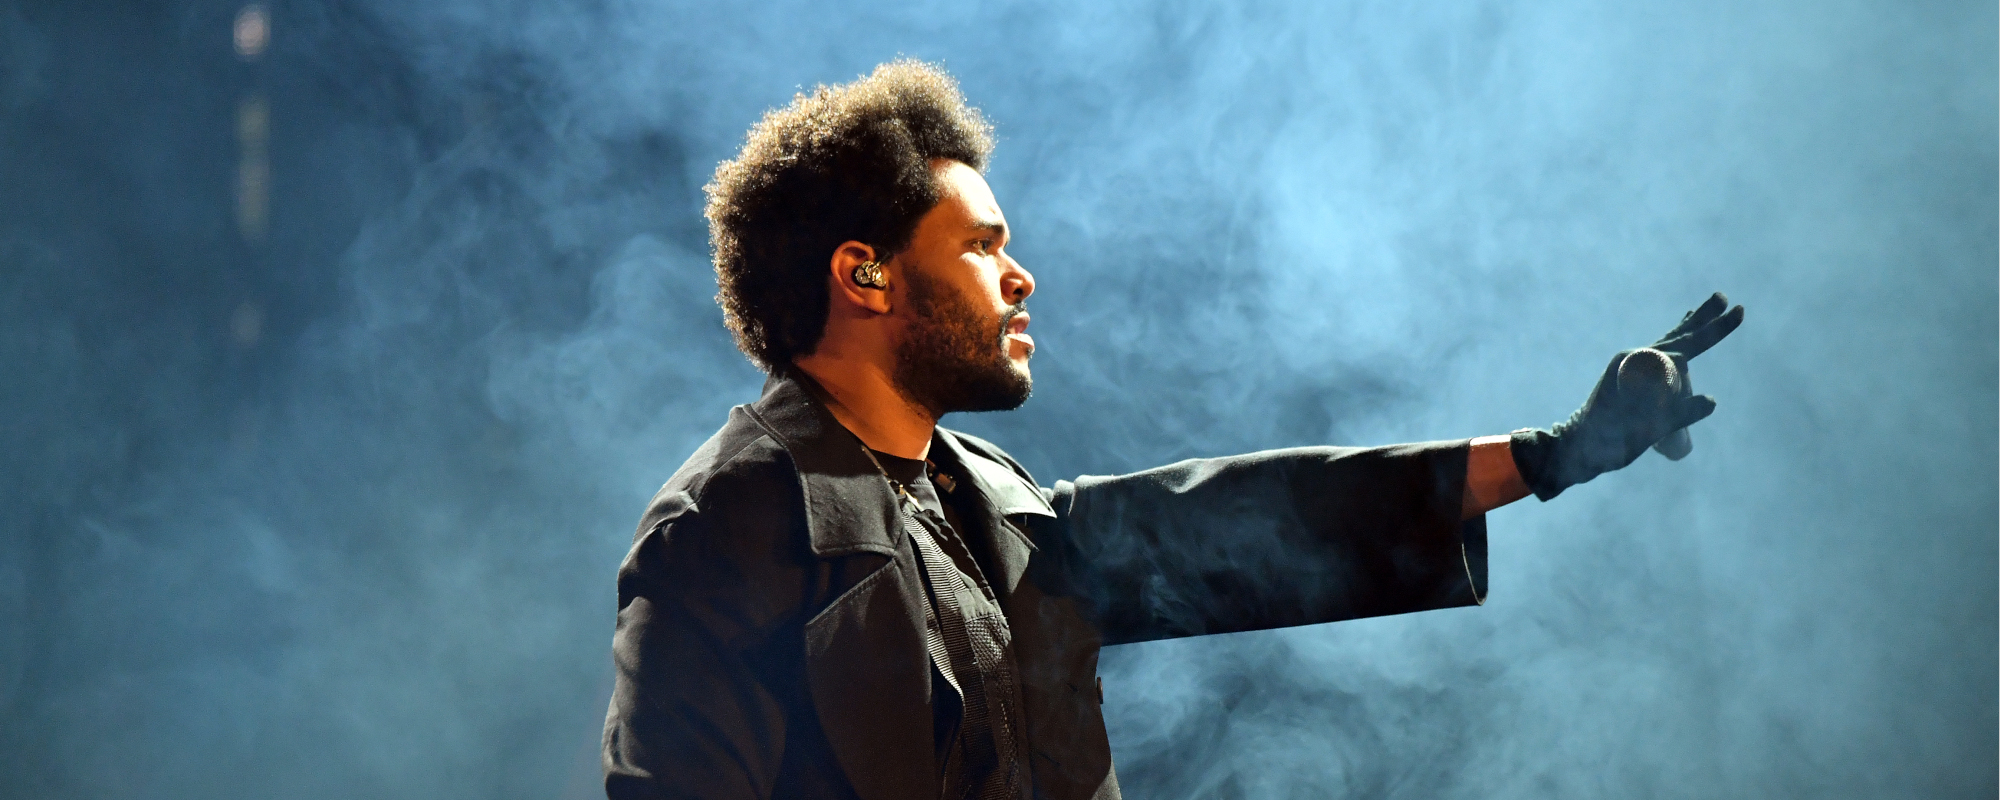 The Weeknd Says New Album Is “Around the Corner”